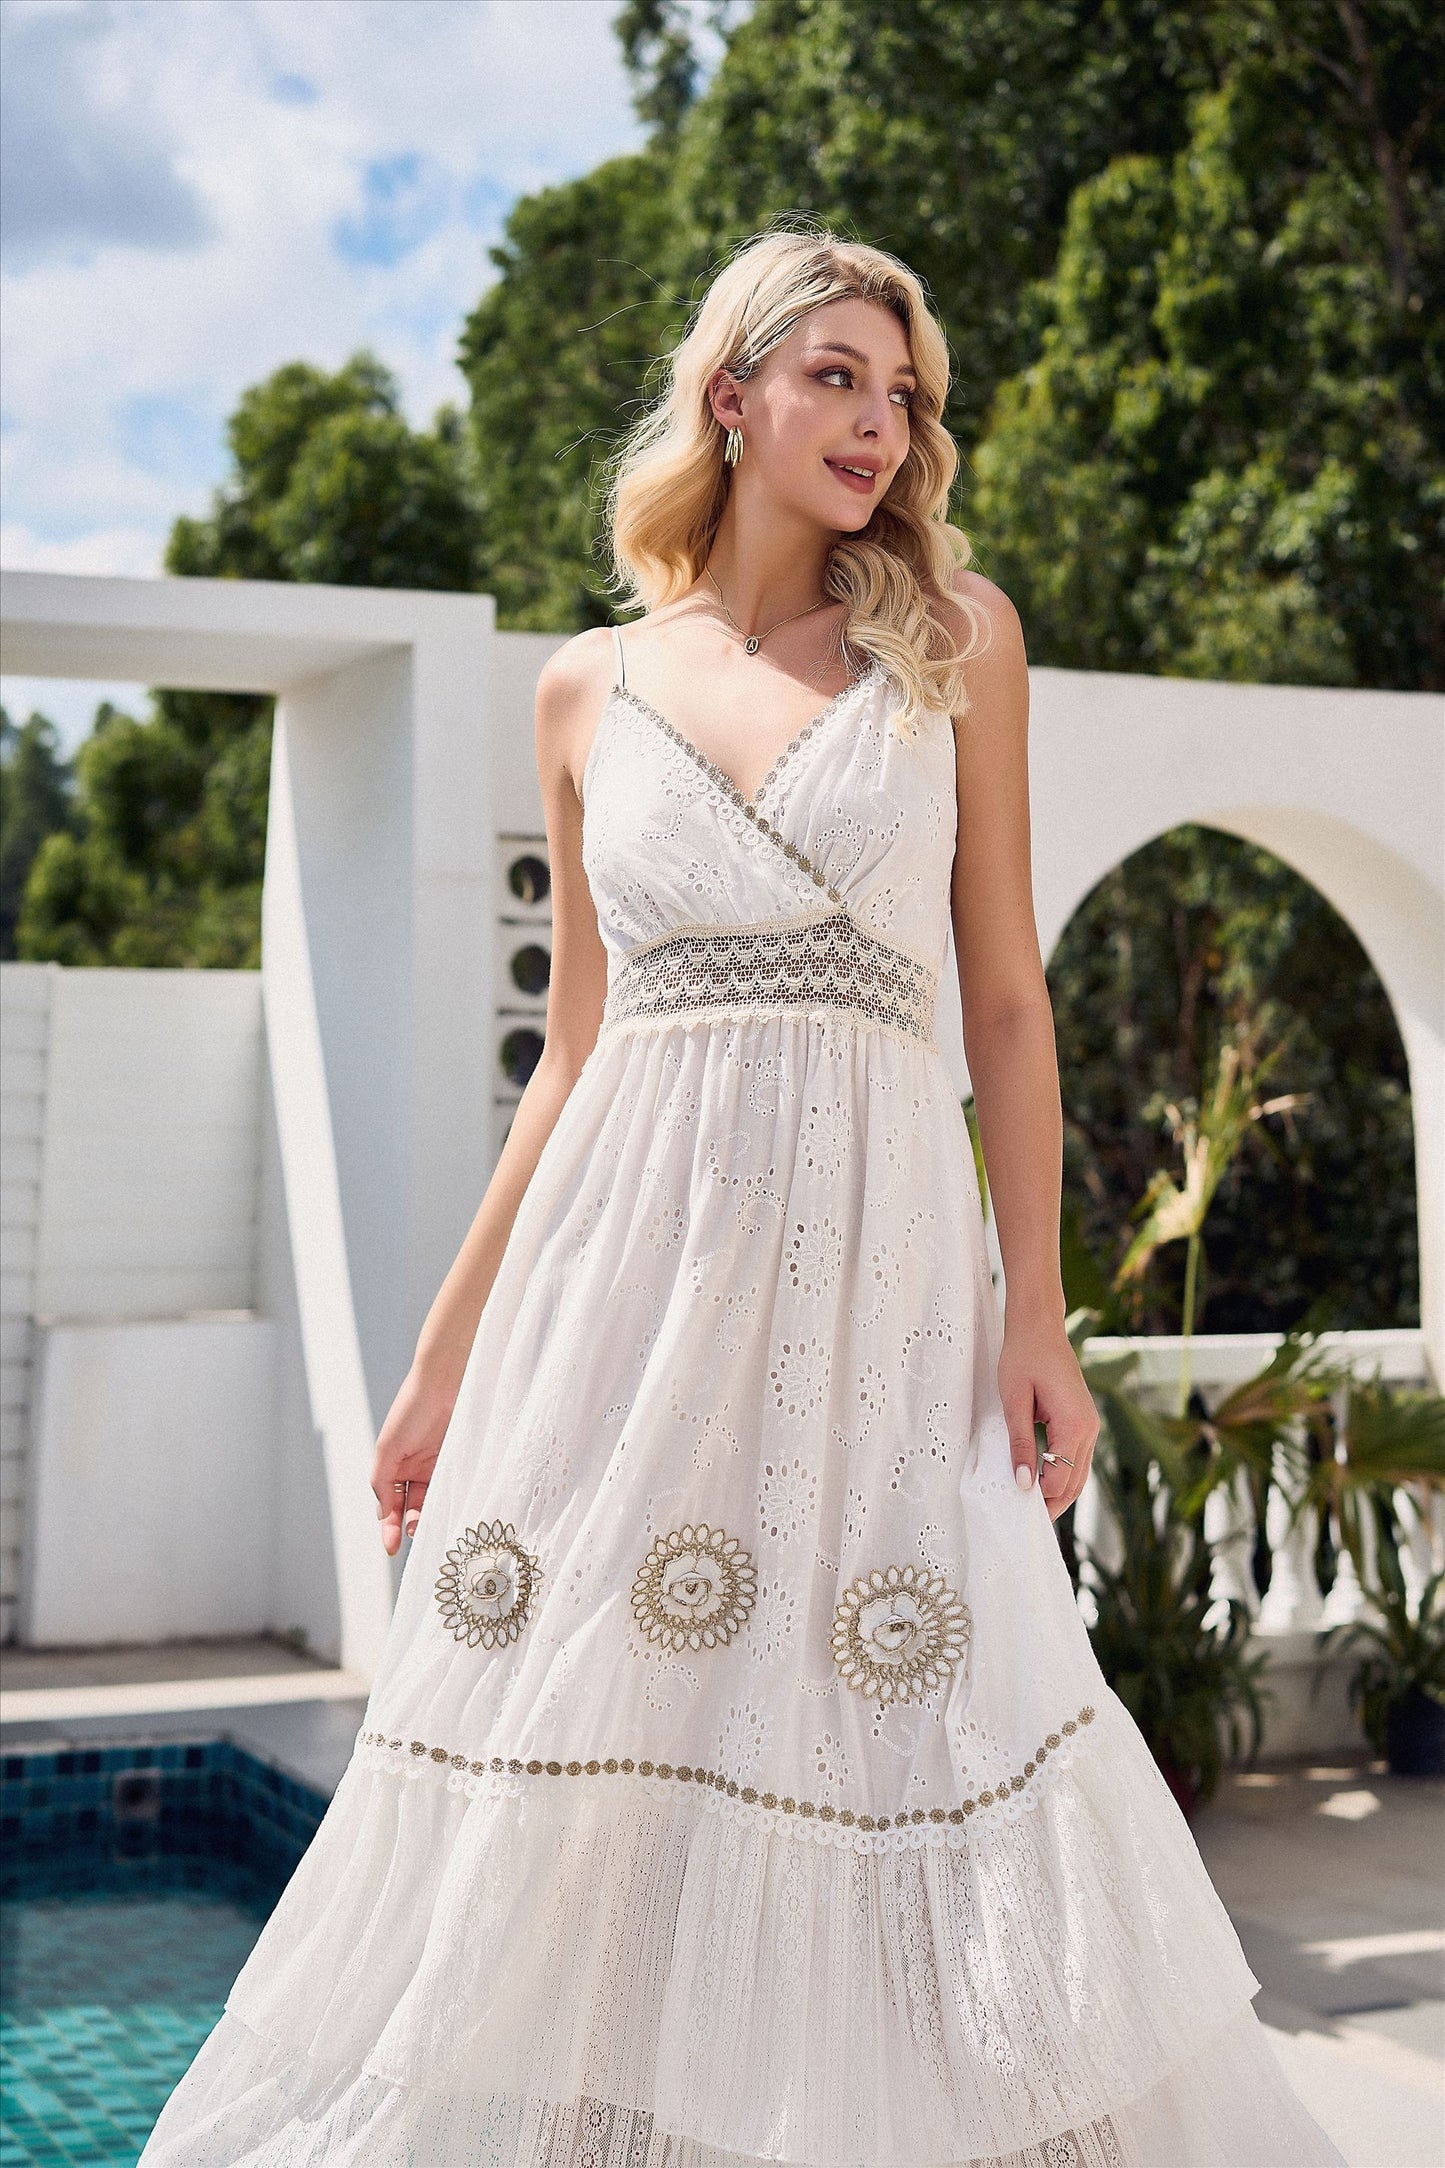 Boho Beach Hollow-out Floral Lace Resort Dress